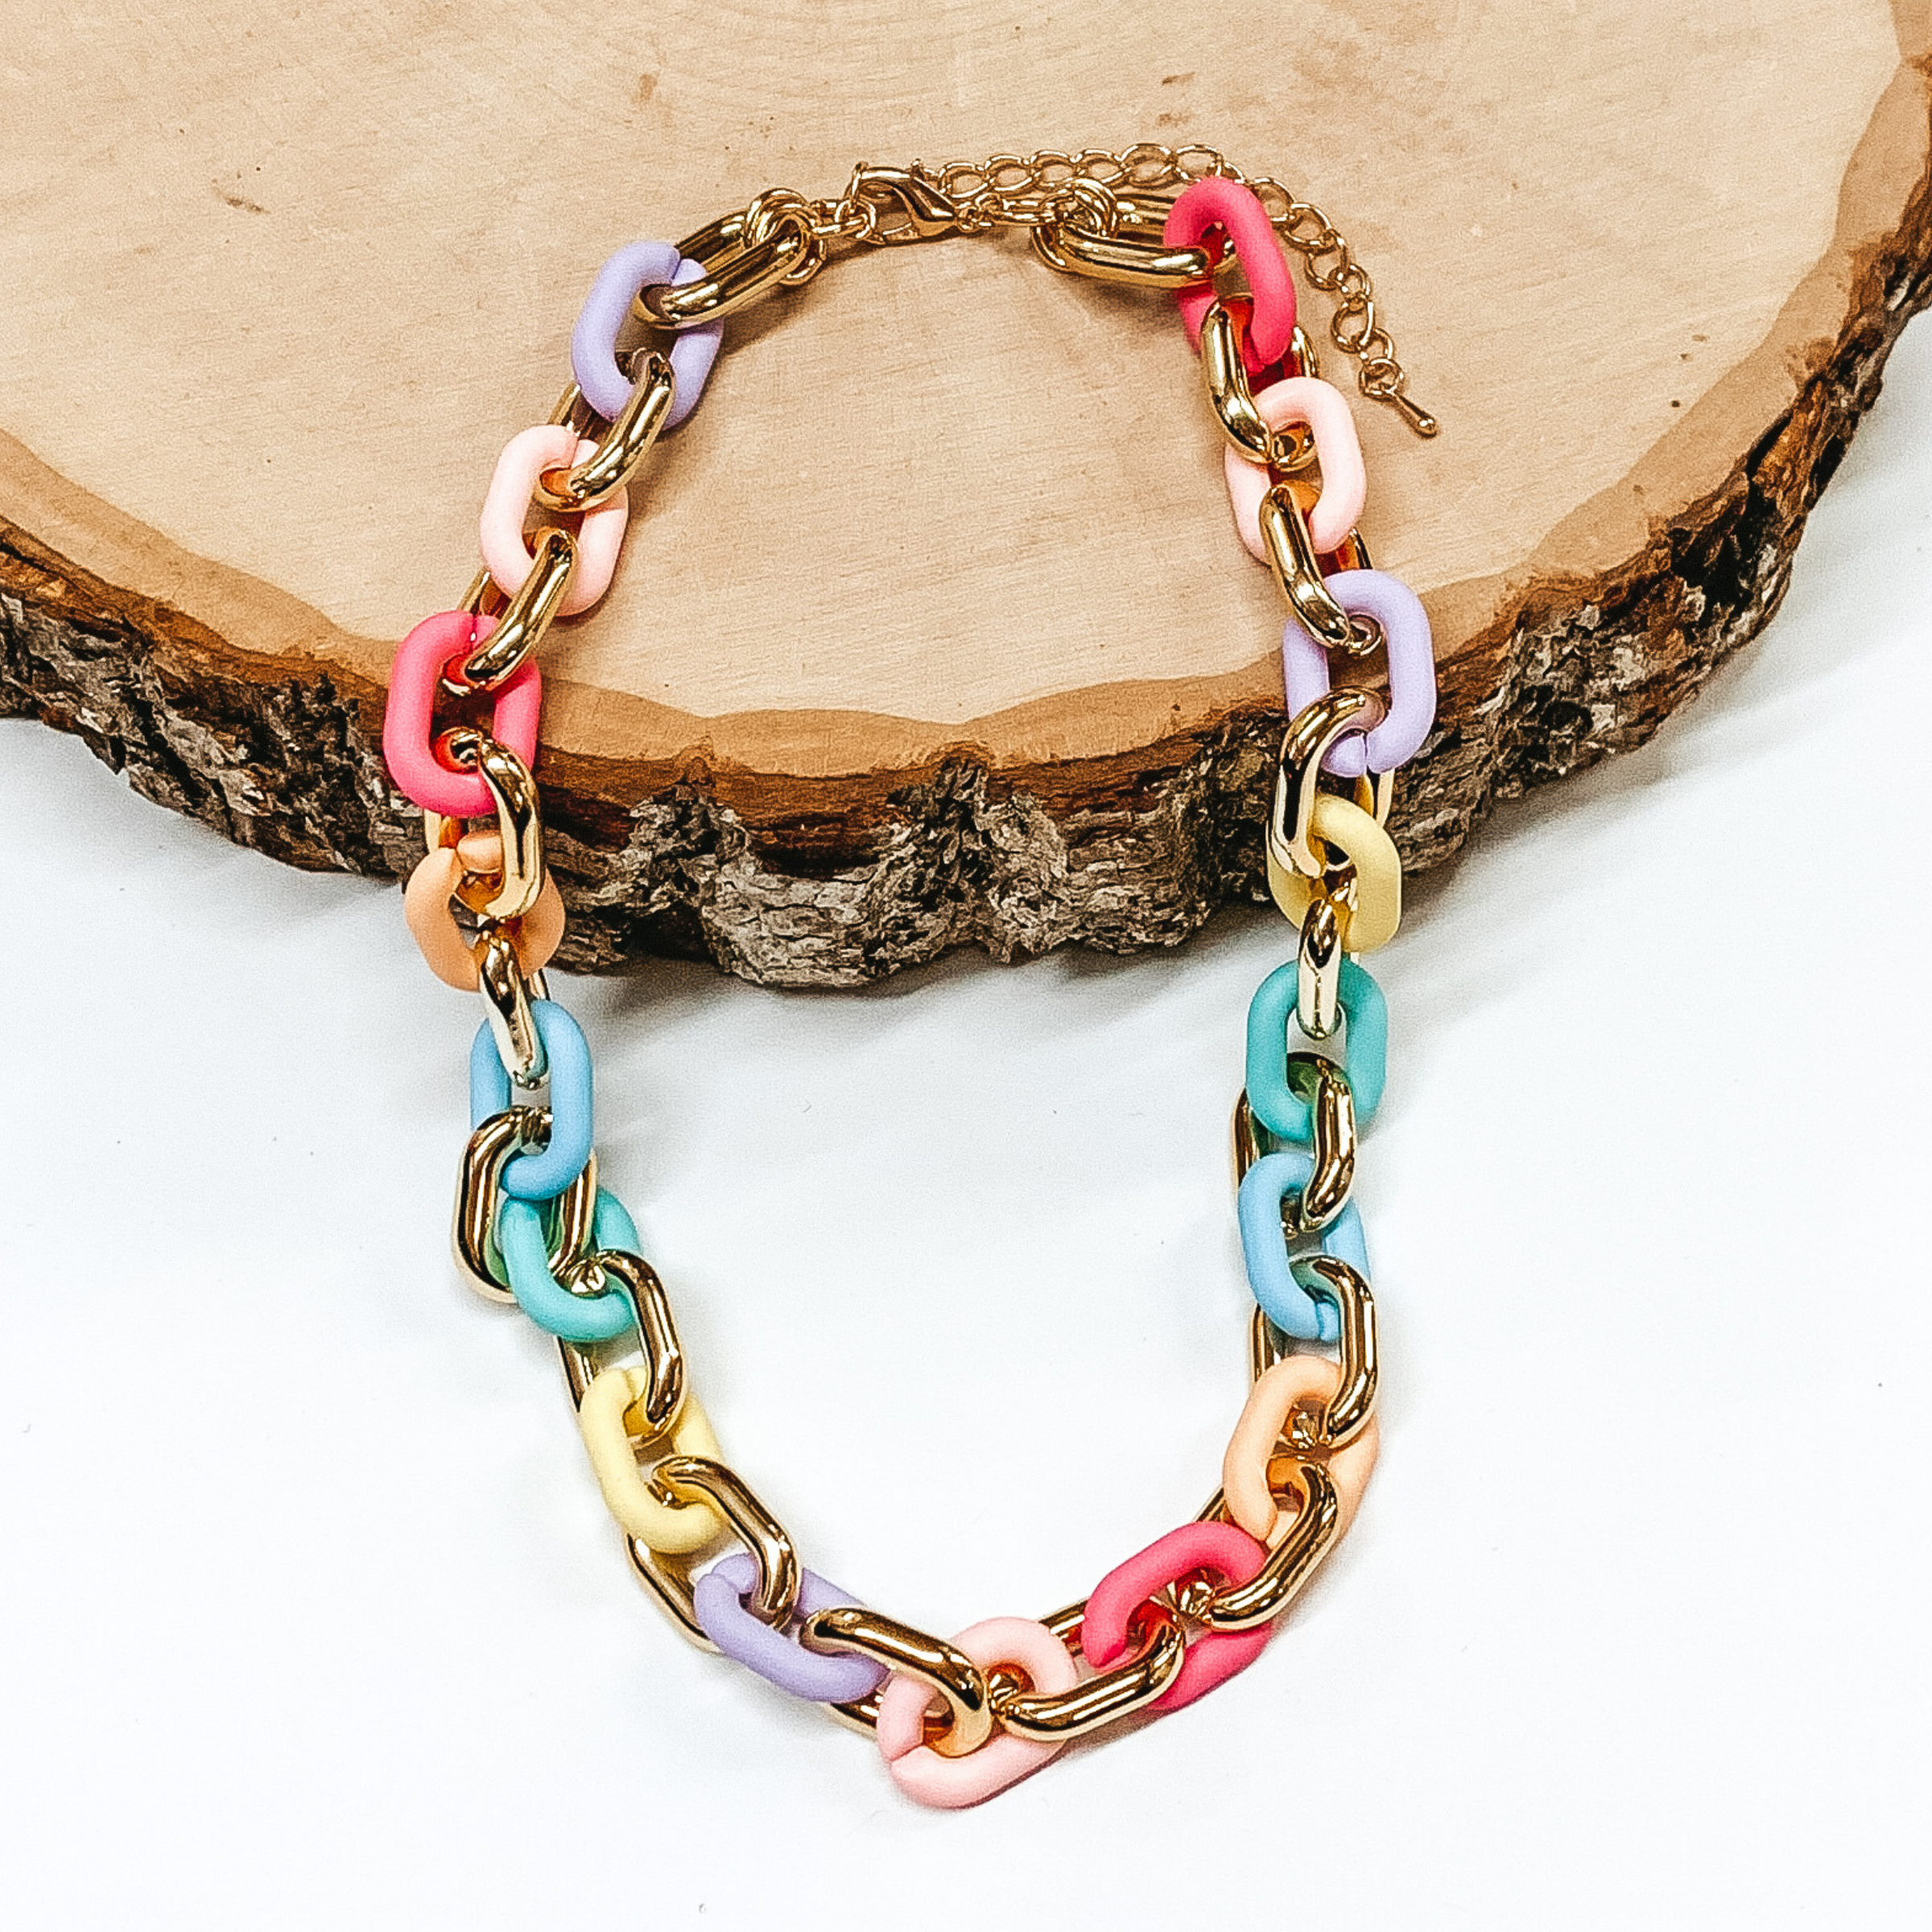 Thick chain link necklace. This necklace includes gold links and multicolored, matte links. This necklace is pictured partially laying on a piece of wood on a white background.